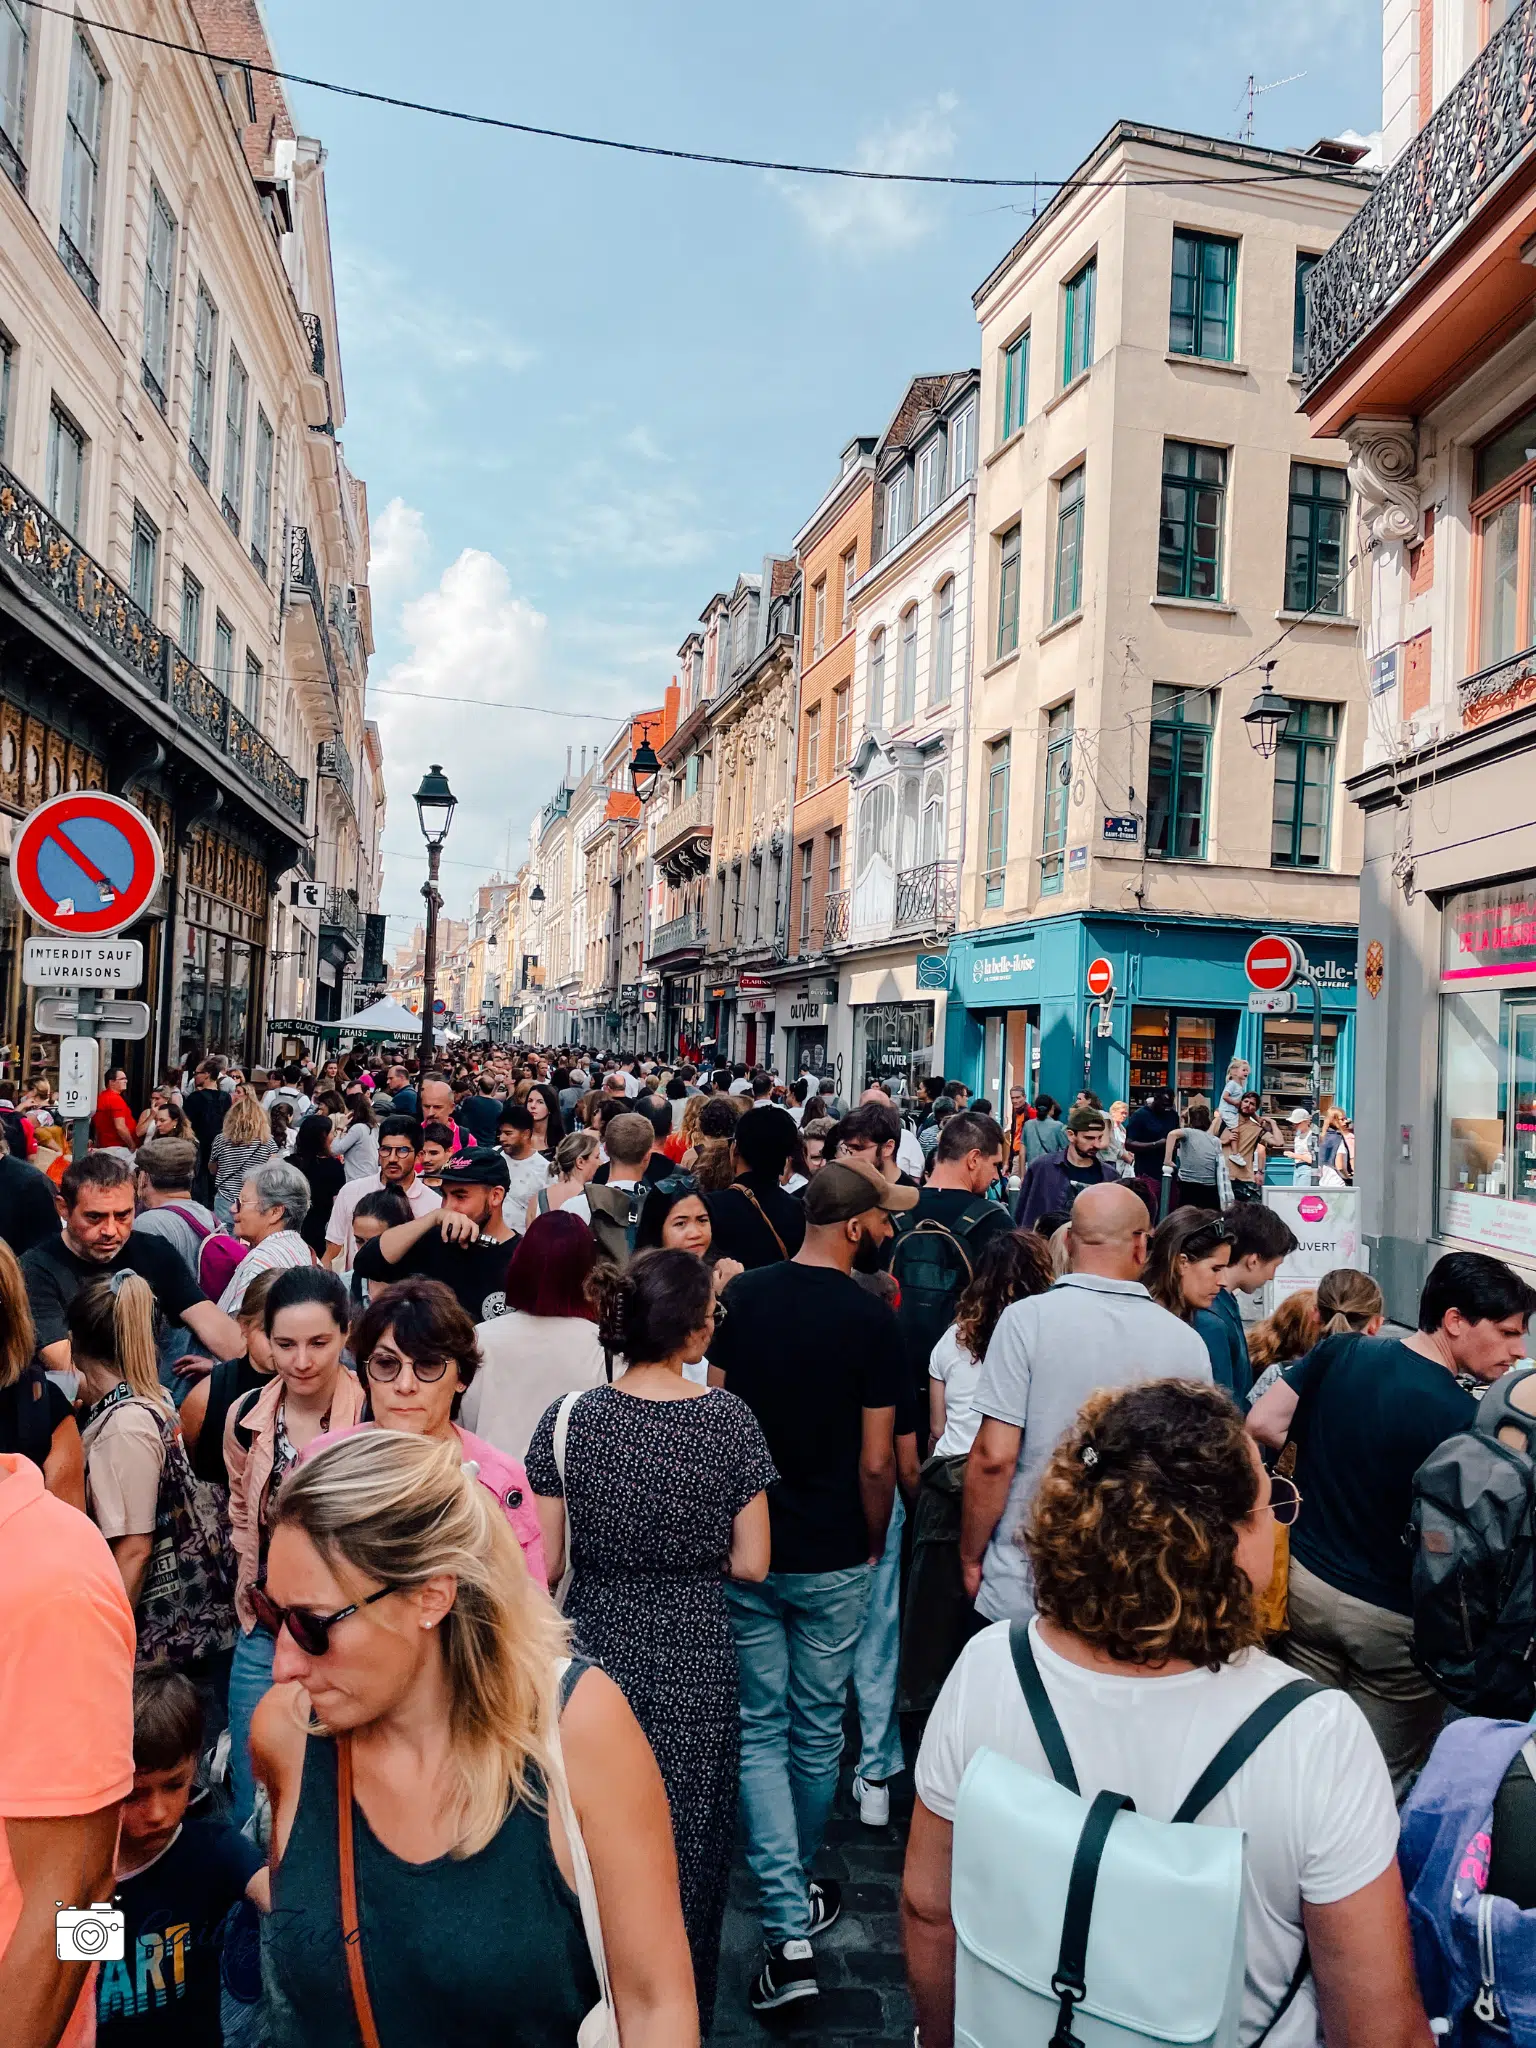 Vieux Lille completely packed with people during Braderie